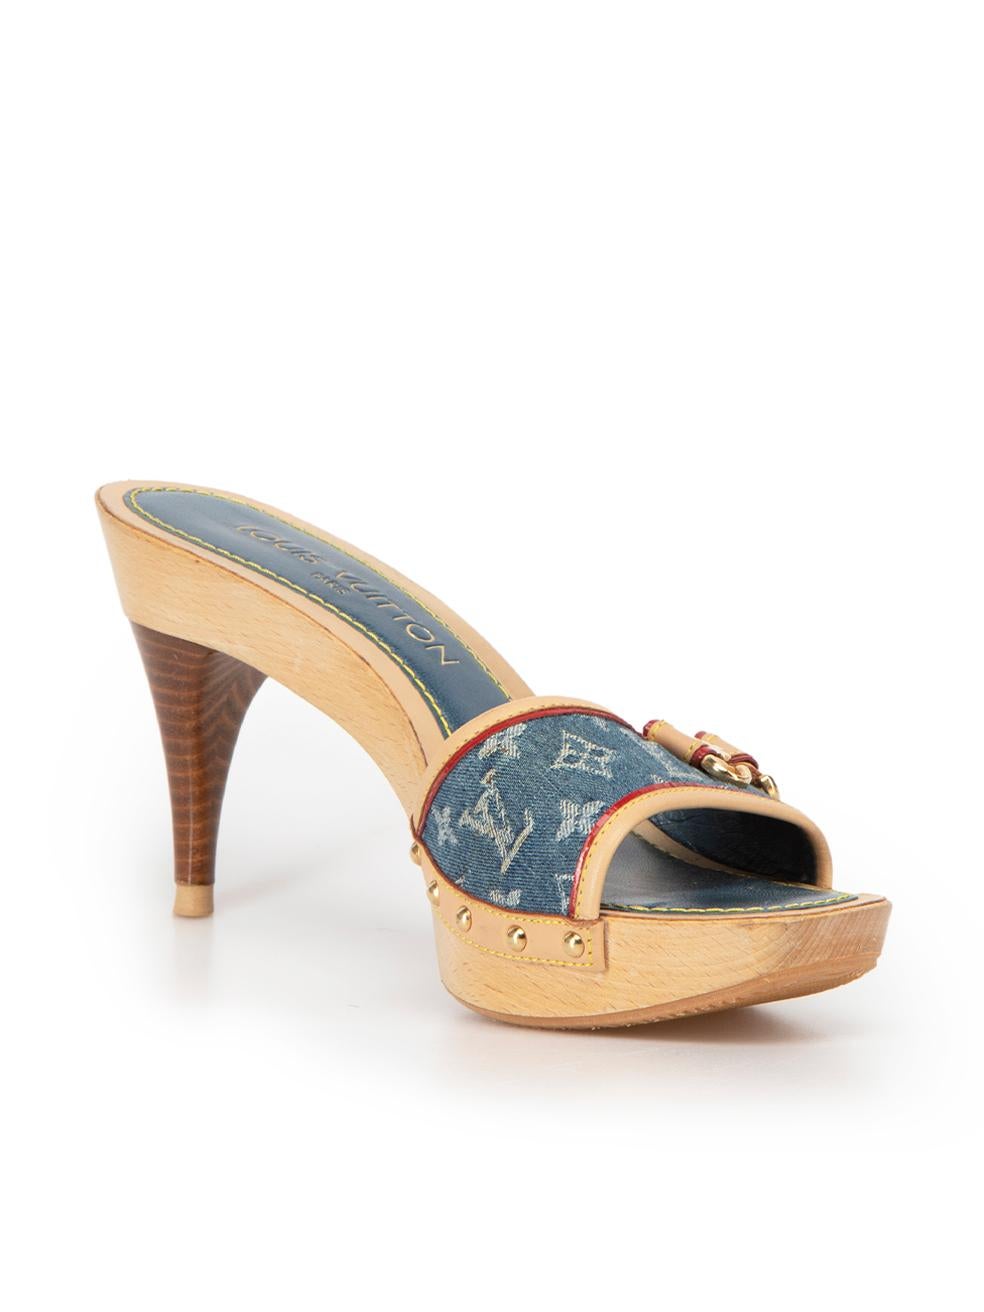 CONDITION is Very good. Minimal wear to sandals is evident. Minimal wear to the right front strap which has a dark stain on the leather. There are also scuffs to the heel stem on this used Louis Vuitton designer resale item. This item includes the